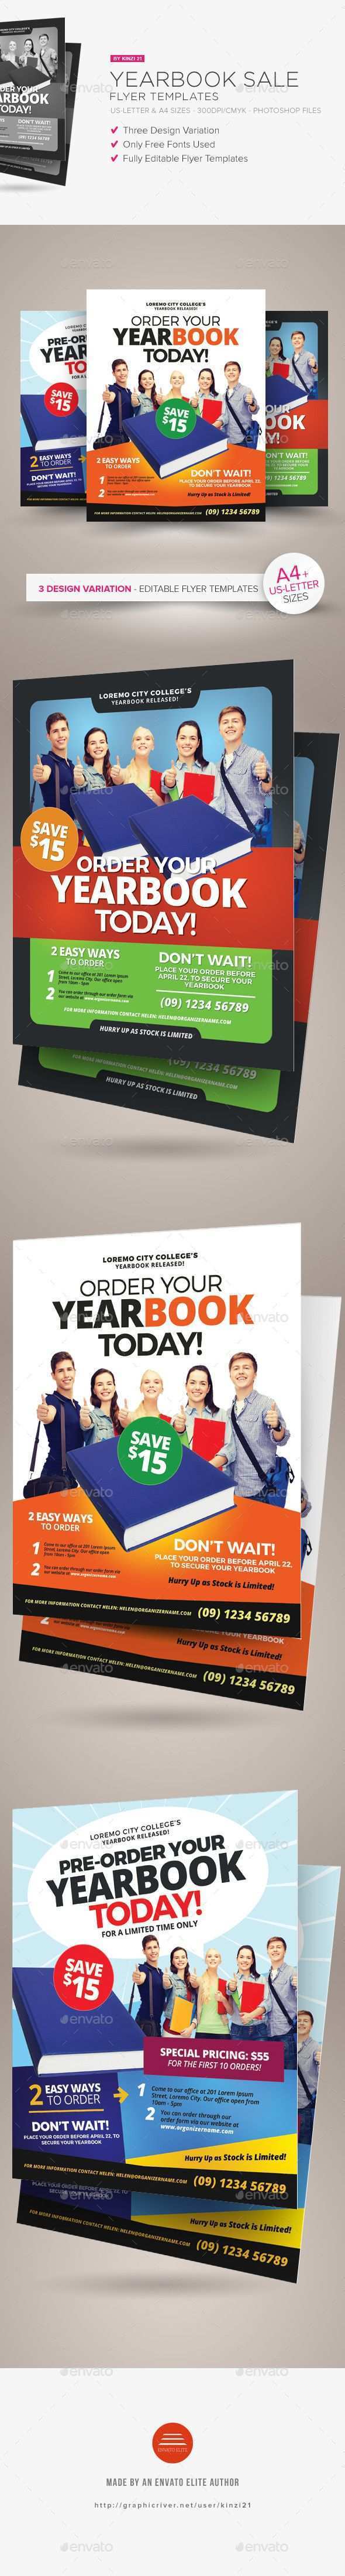 14 Visiting Yearbook Flyer Template Now for Yearbook Flyer Template